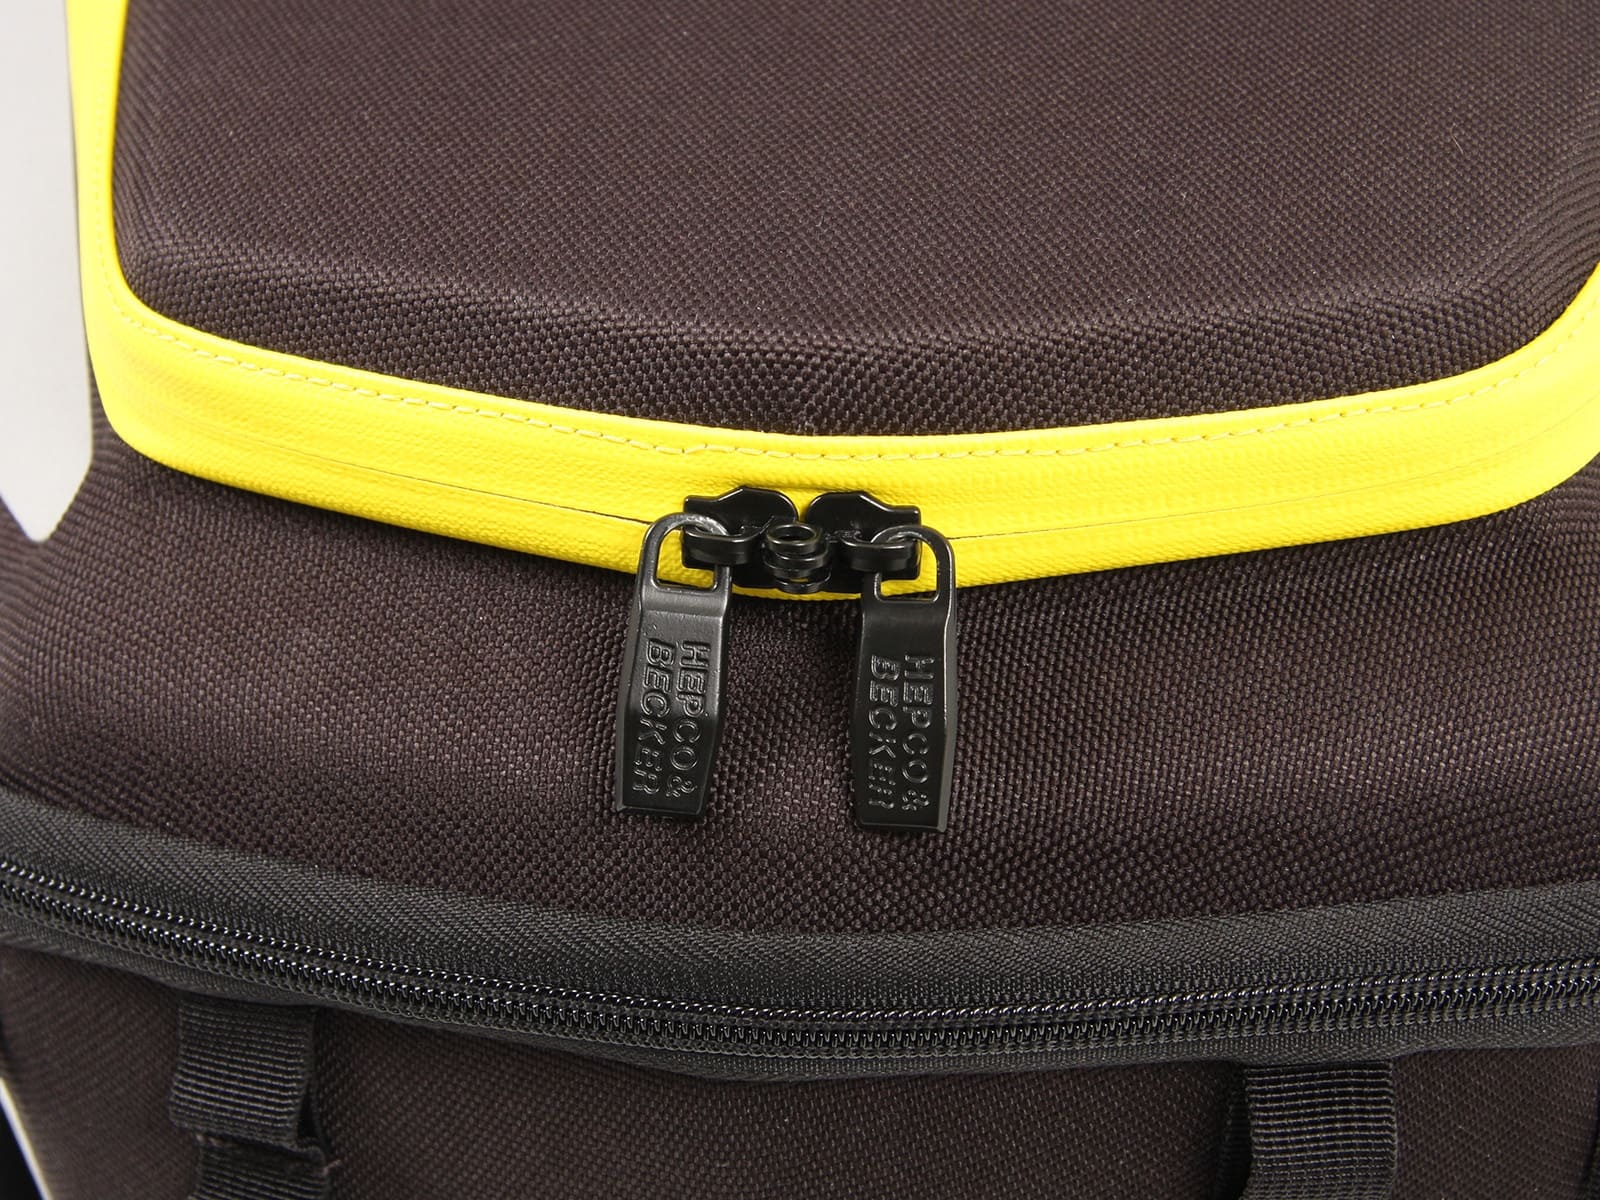 Royster rearbag with strap fastening kit – black/yellow